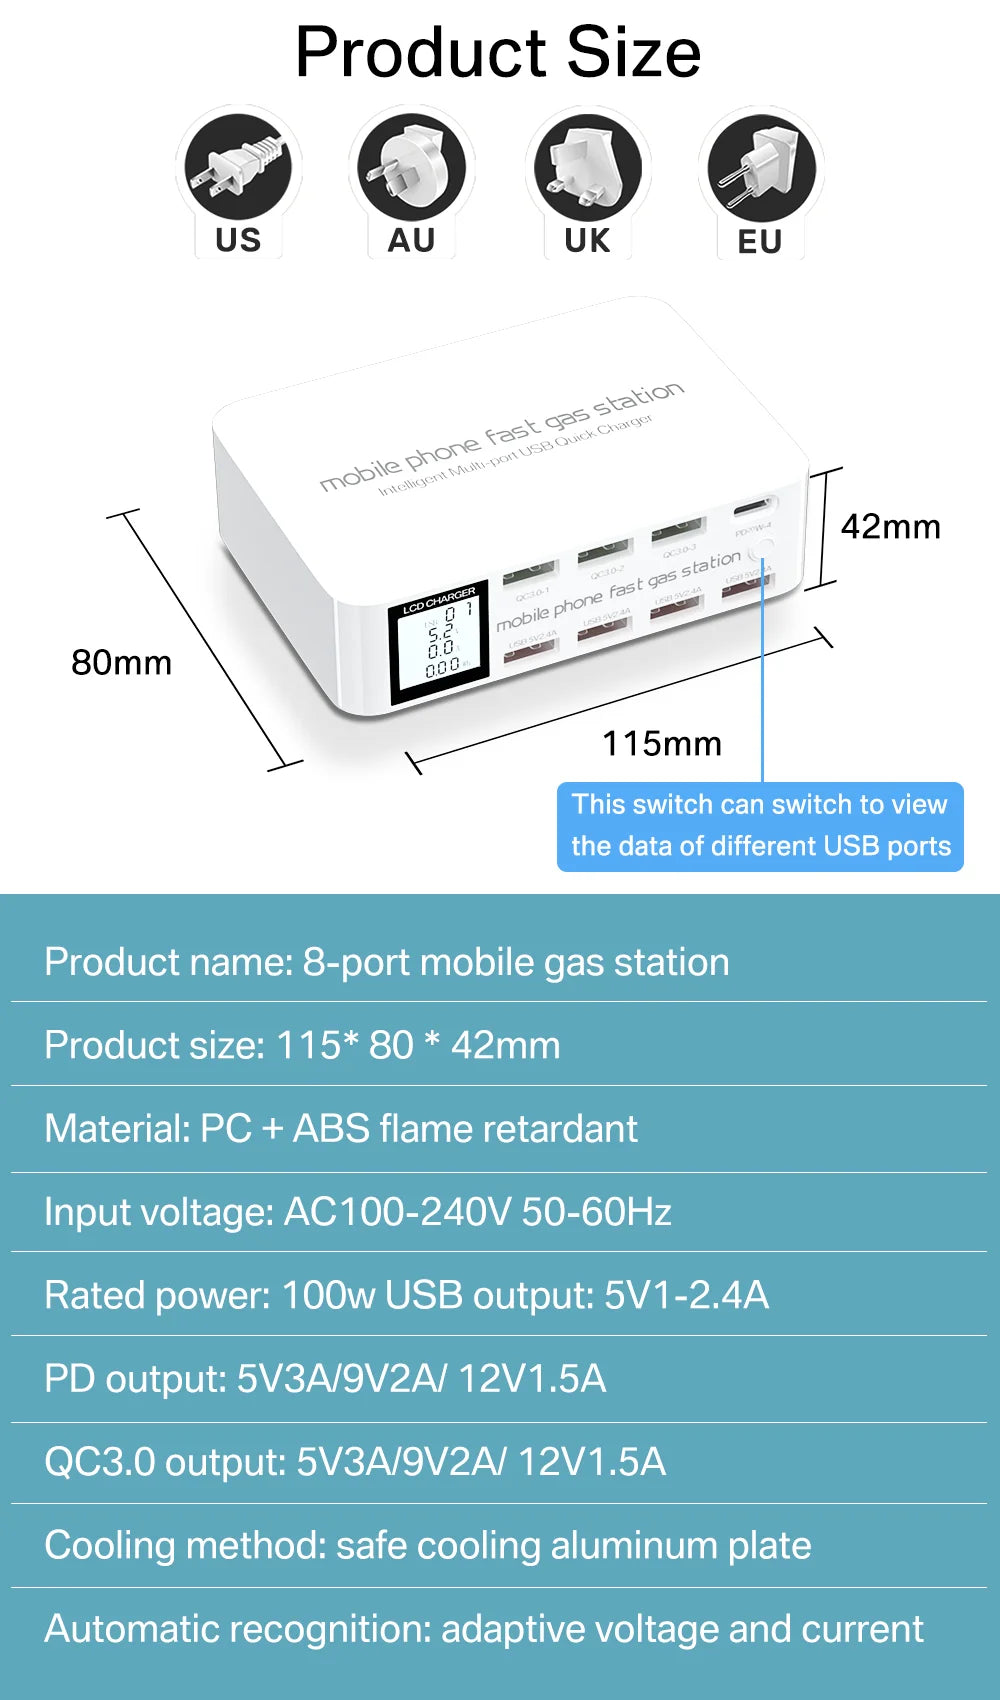 100W USB Charging Station With 3 QC3.0 Quick Charge USB Port 20W PD USB Type C Port LCD Display Fast Charger For iPhone Xiaomi